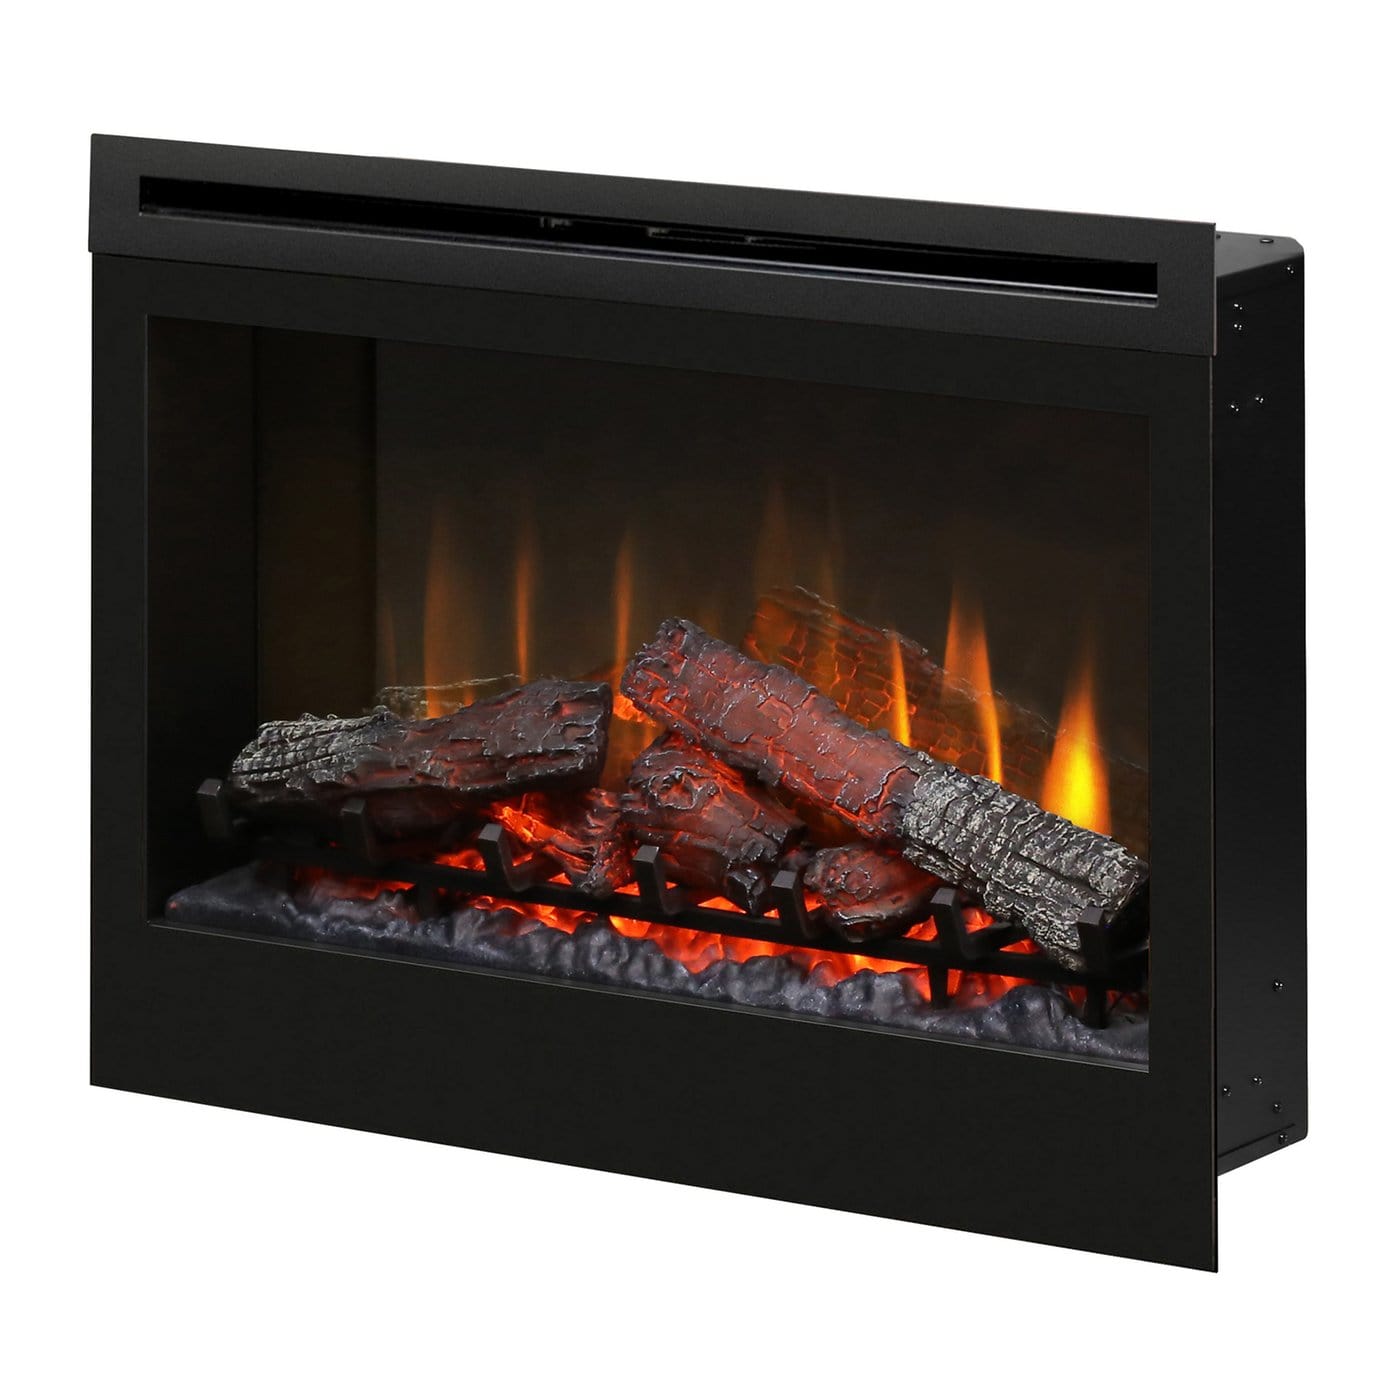 Dimplex 33-Inch Self Trimming Plug-in Electric Firebox with Logs